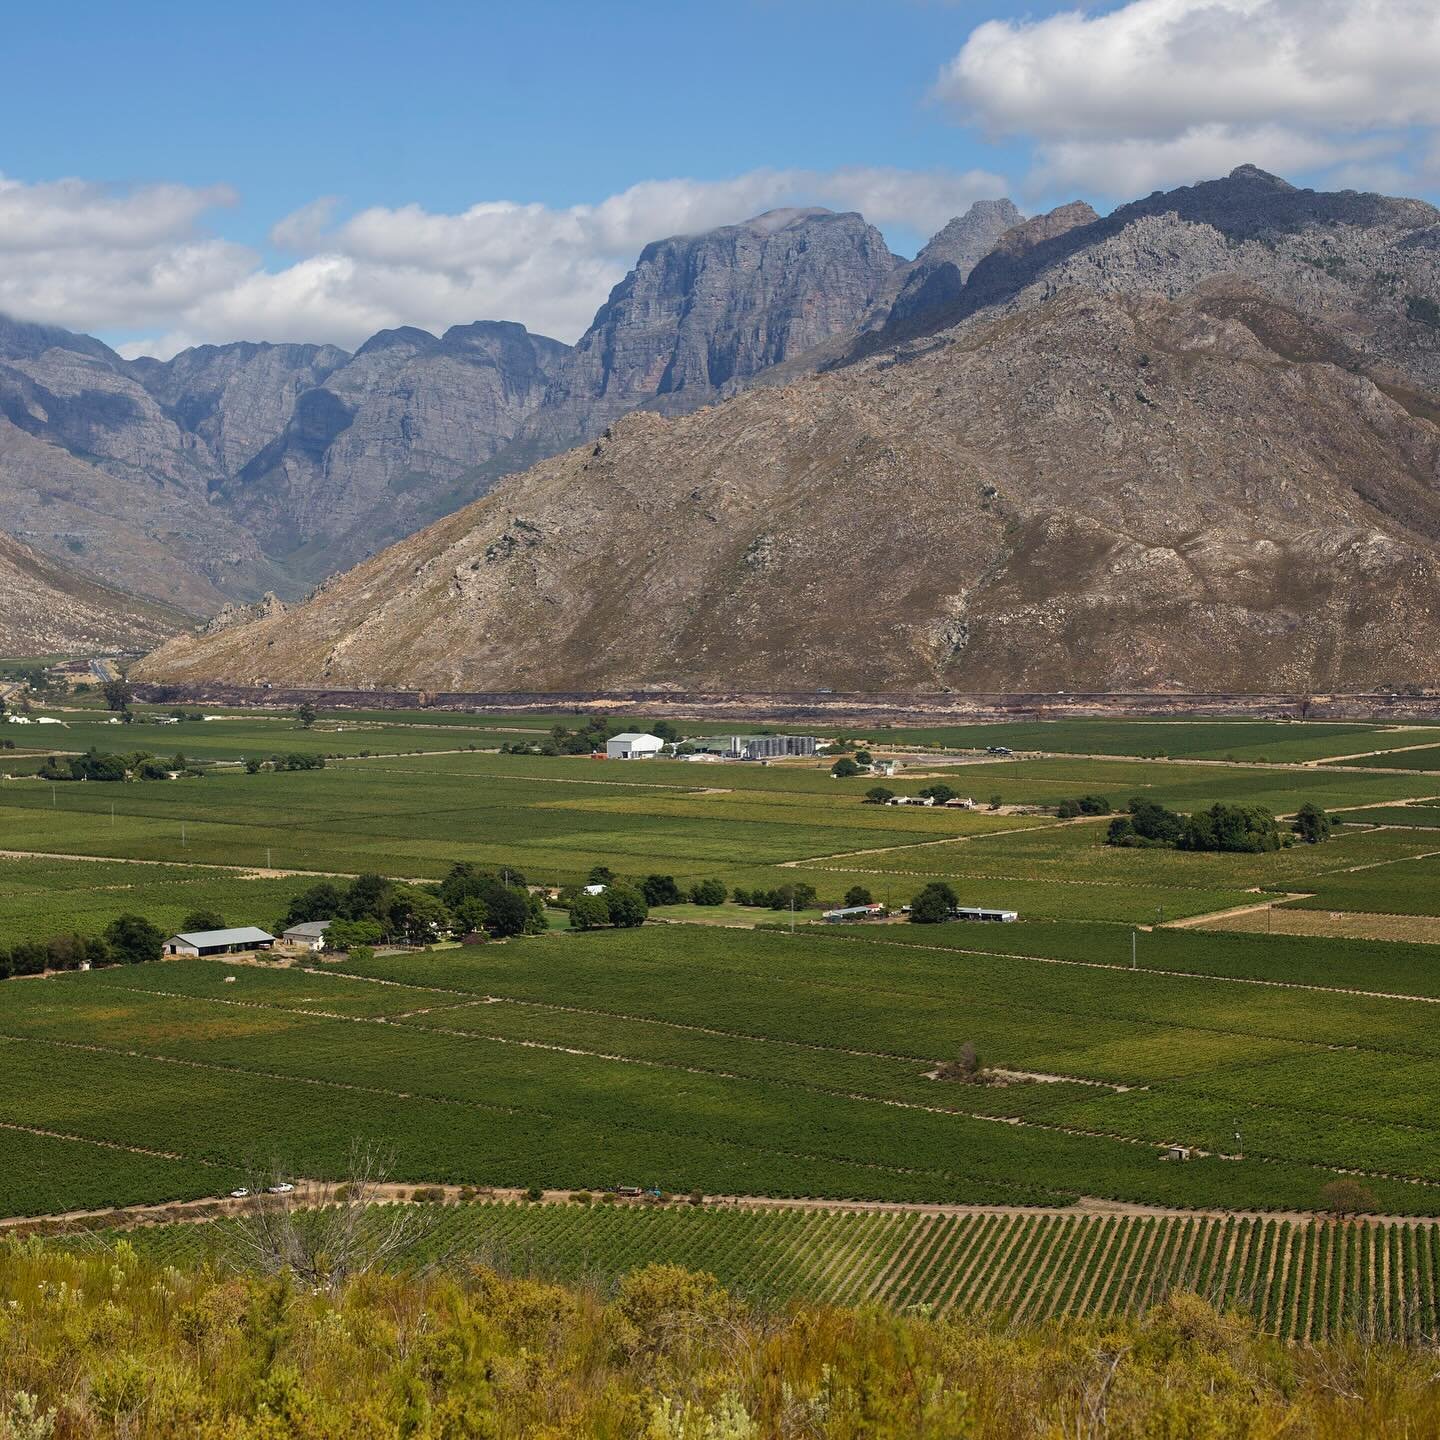 Entering our valley from the south-west, our Chenin Blanc route begins at Breedekloof Maker, Du Toitskloof Wines. The winery is well-known as one of the largest commercial Chenin Blanc producers in South African retail, but also boasts with their sma